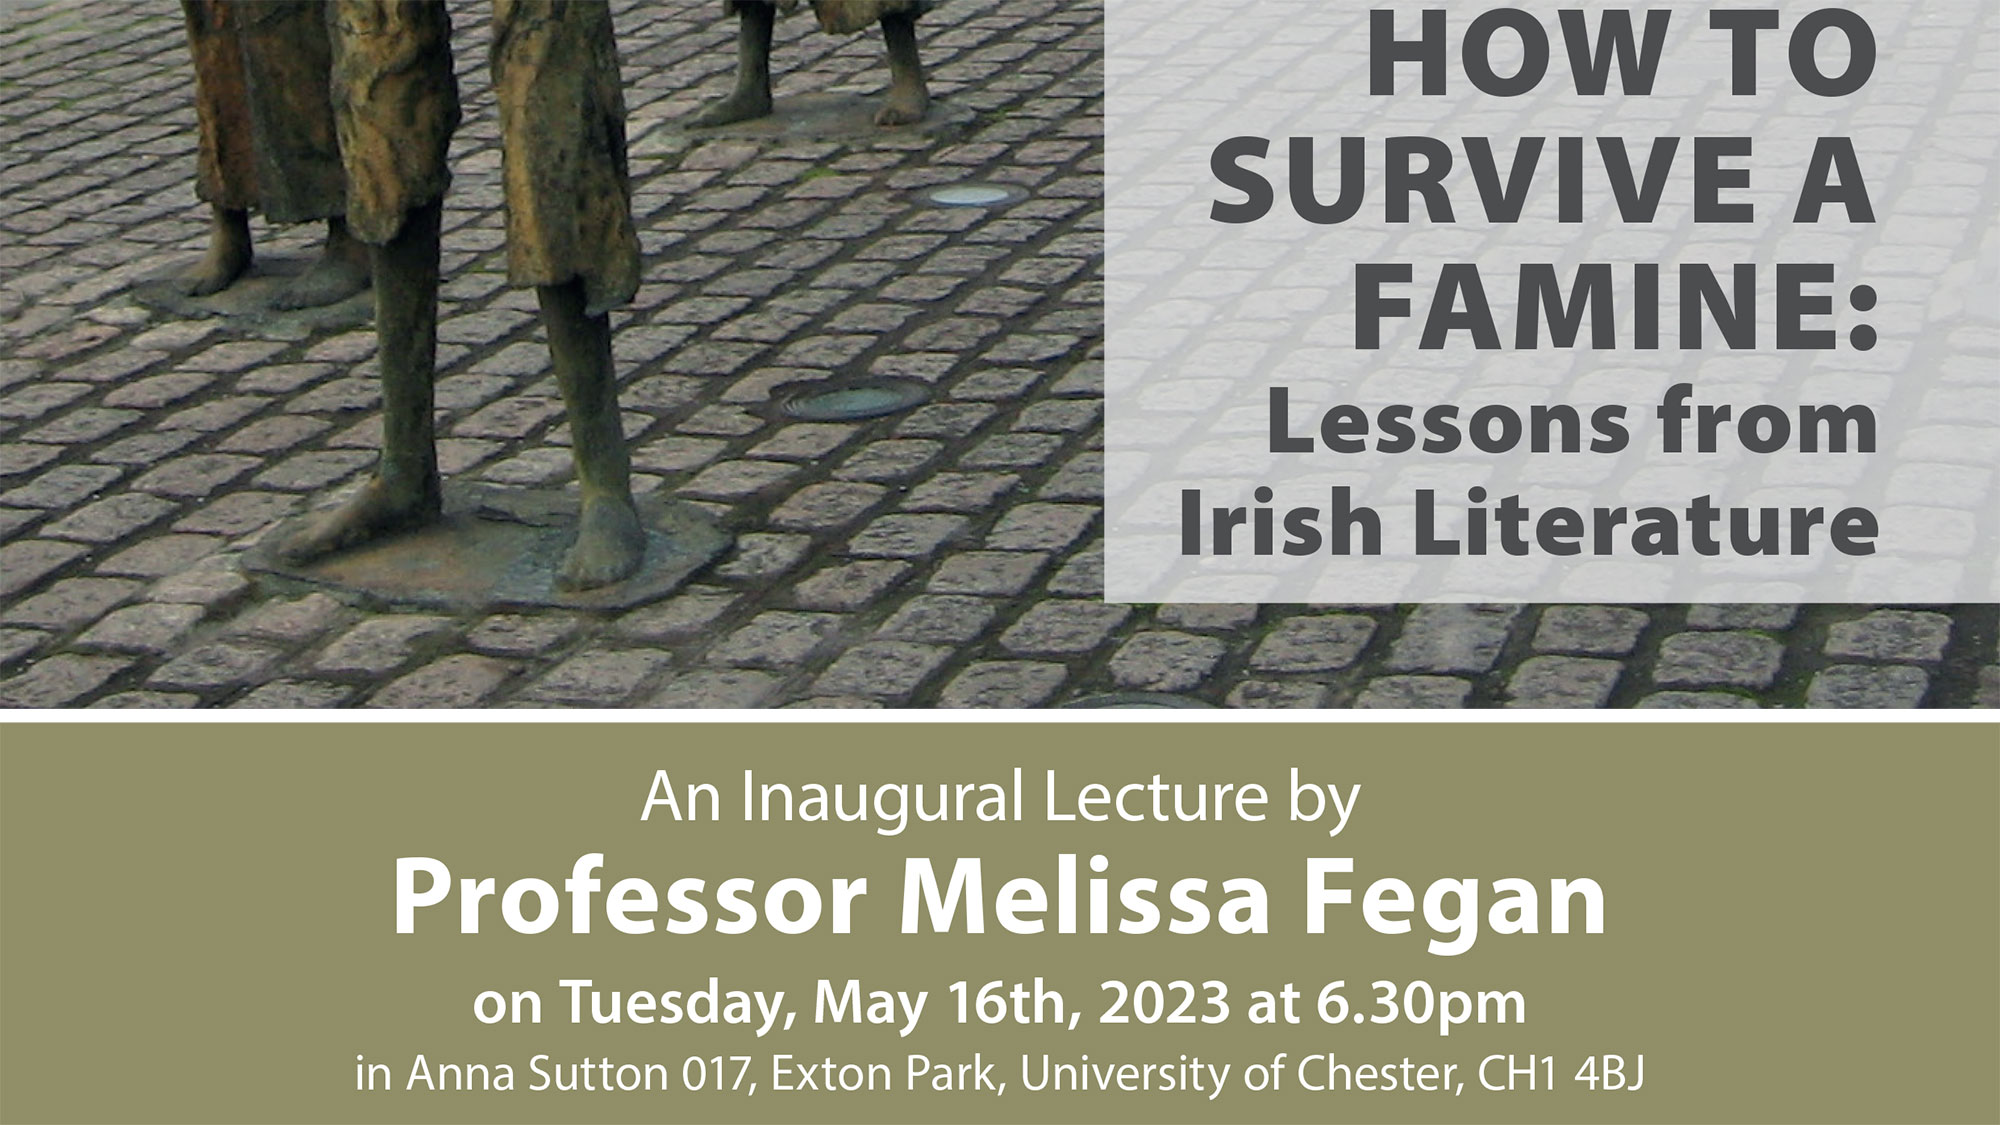 Professor Melissa Fegan inaugural lecture: How to Survive a Famine: Lessons from Irish Literature